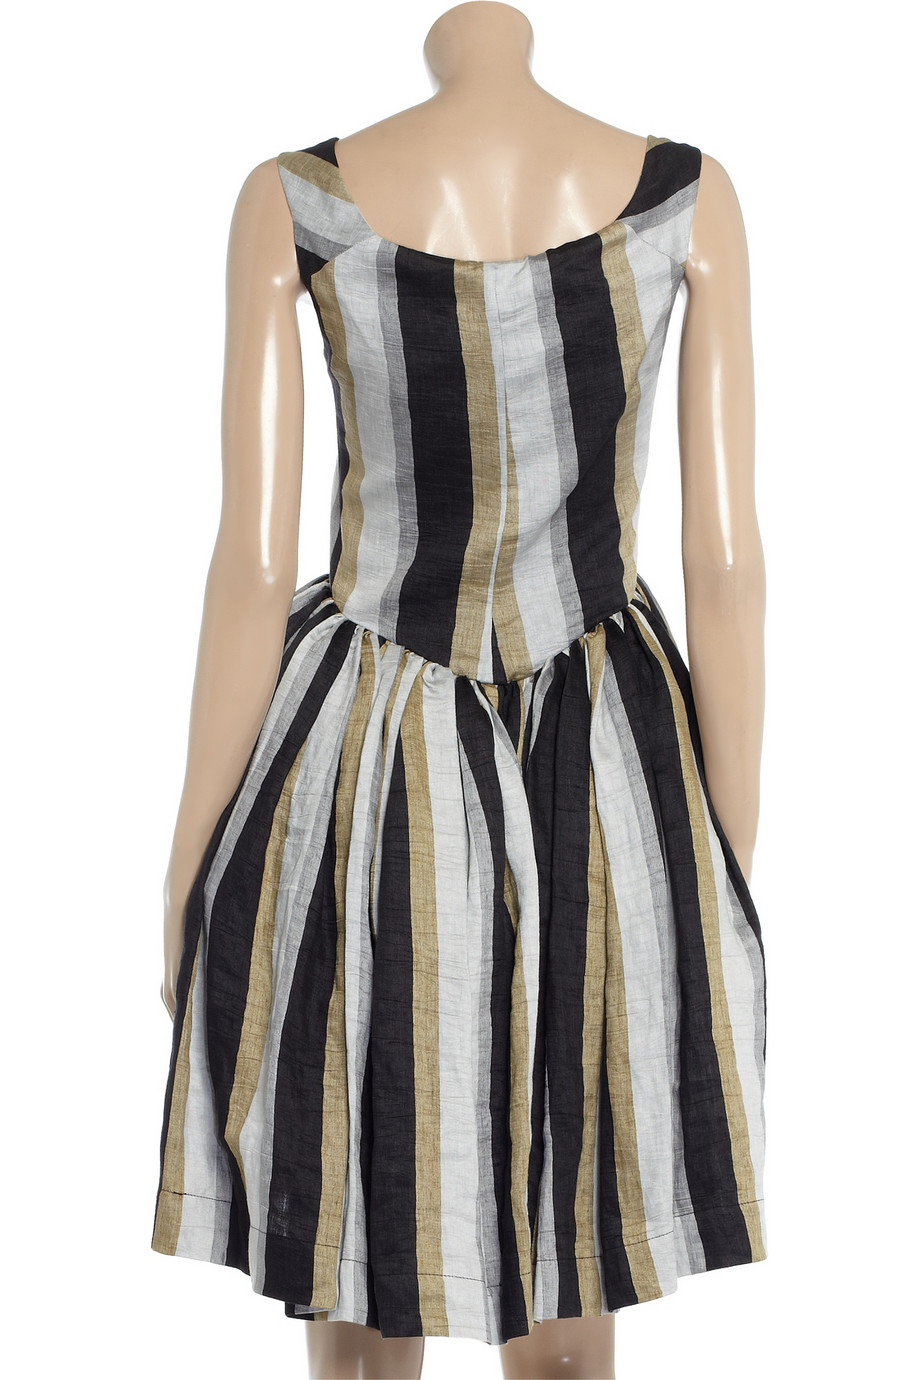 Vivienne Westwood Anglomania Panier Striped Linenblend Dress in Gray ...